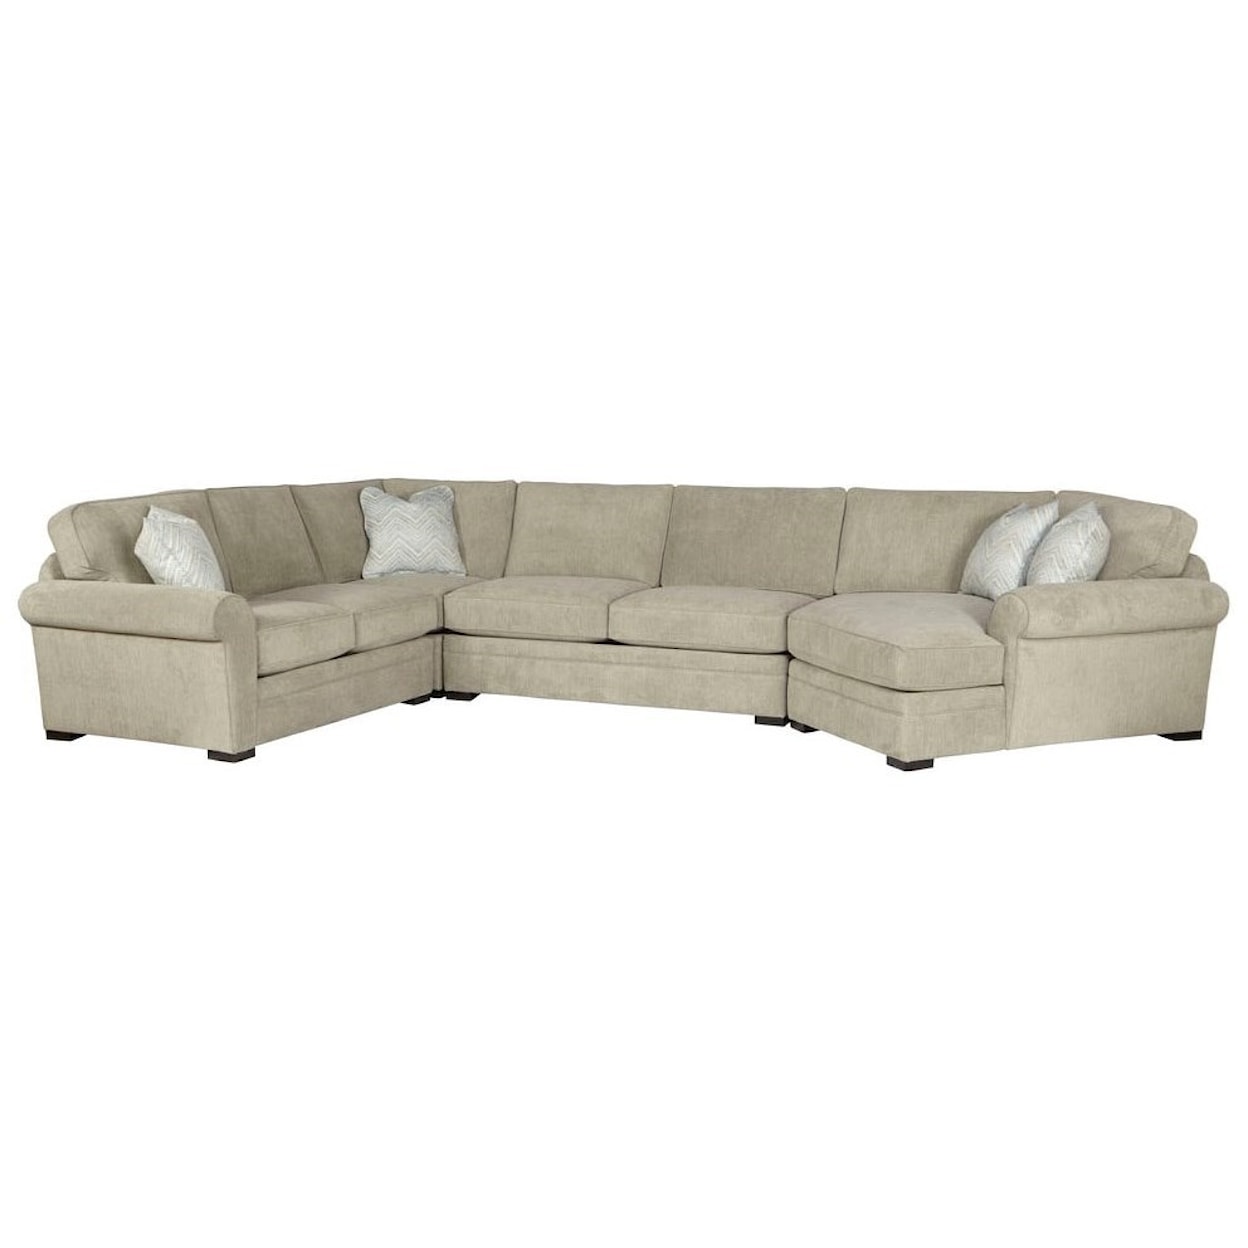 Jonathan Louis Choices - Orion 4-Piece Cuddler Sectional with Pluma Plush